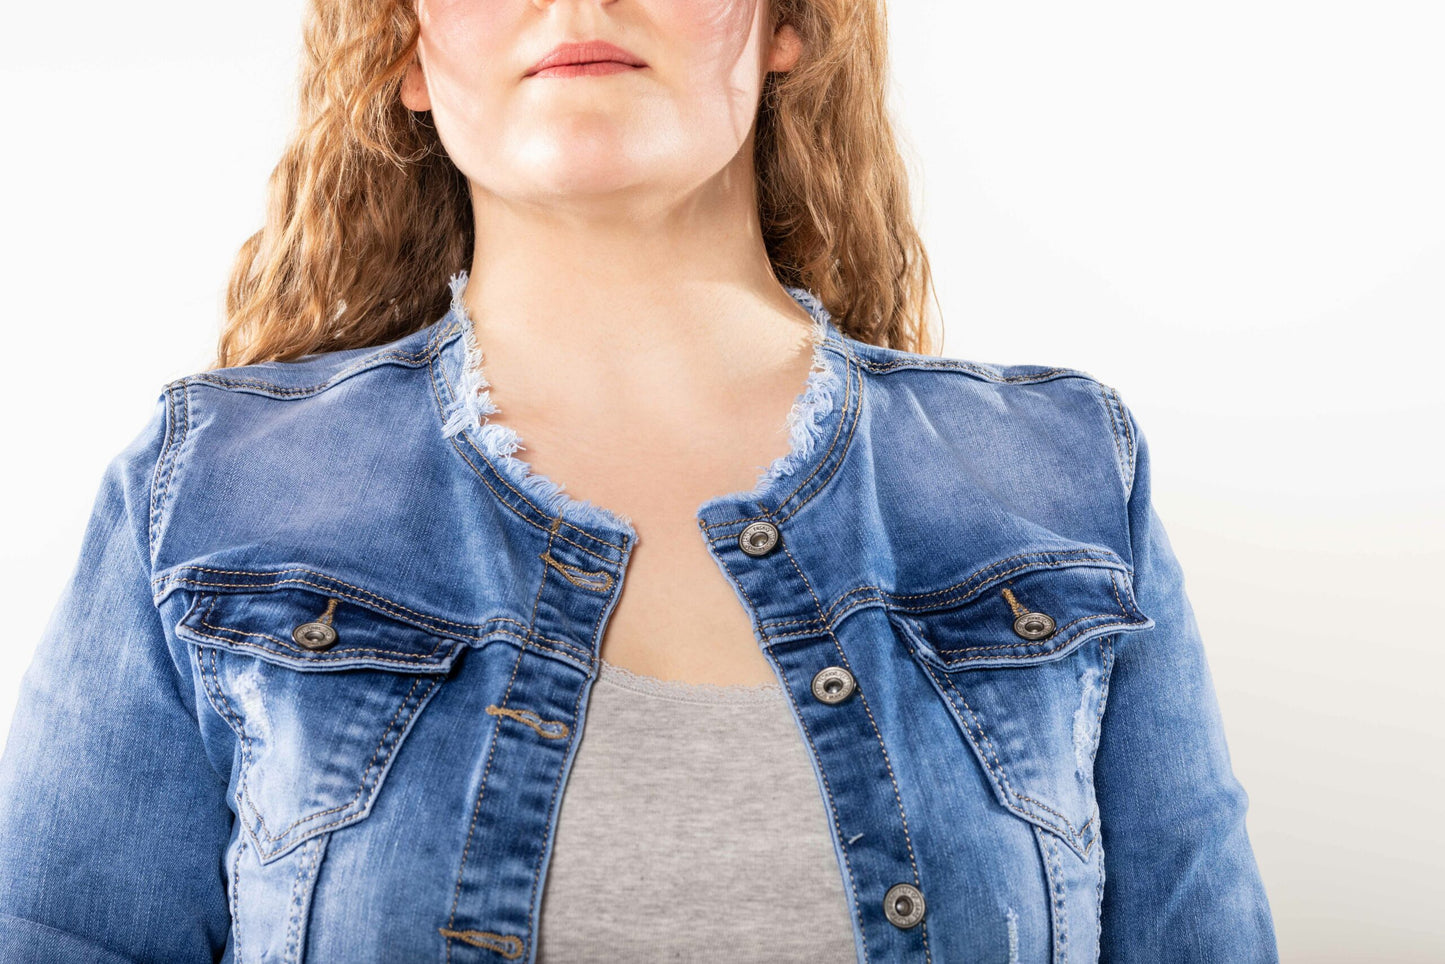 Wholesale Plus Size Blue Jeans Jacket with Fray Detail on the Collar